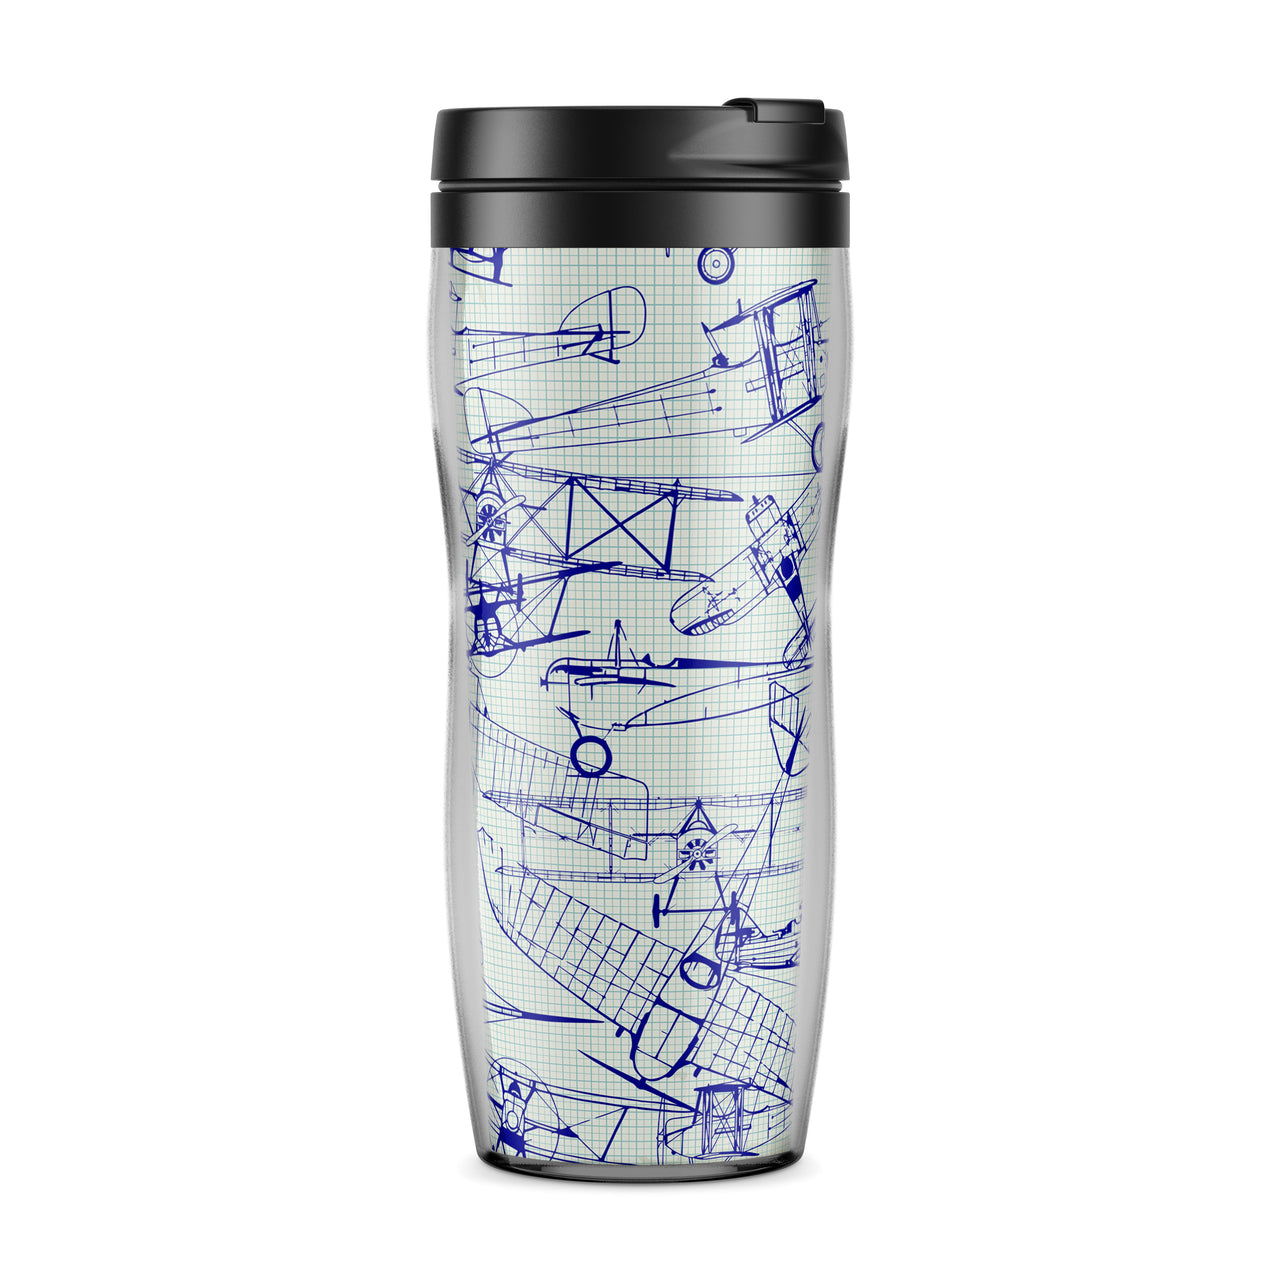 Amazing Drawings of Old Aircrafts Designed Travel Mugs